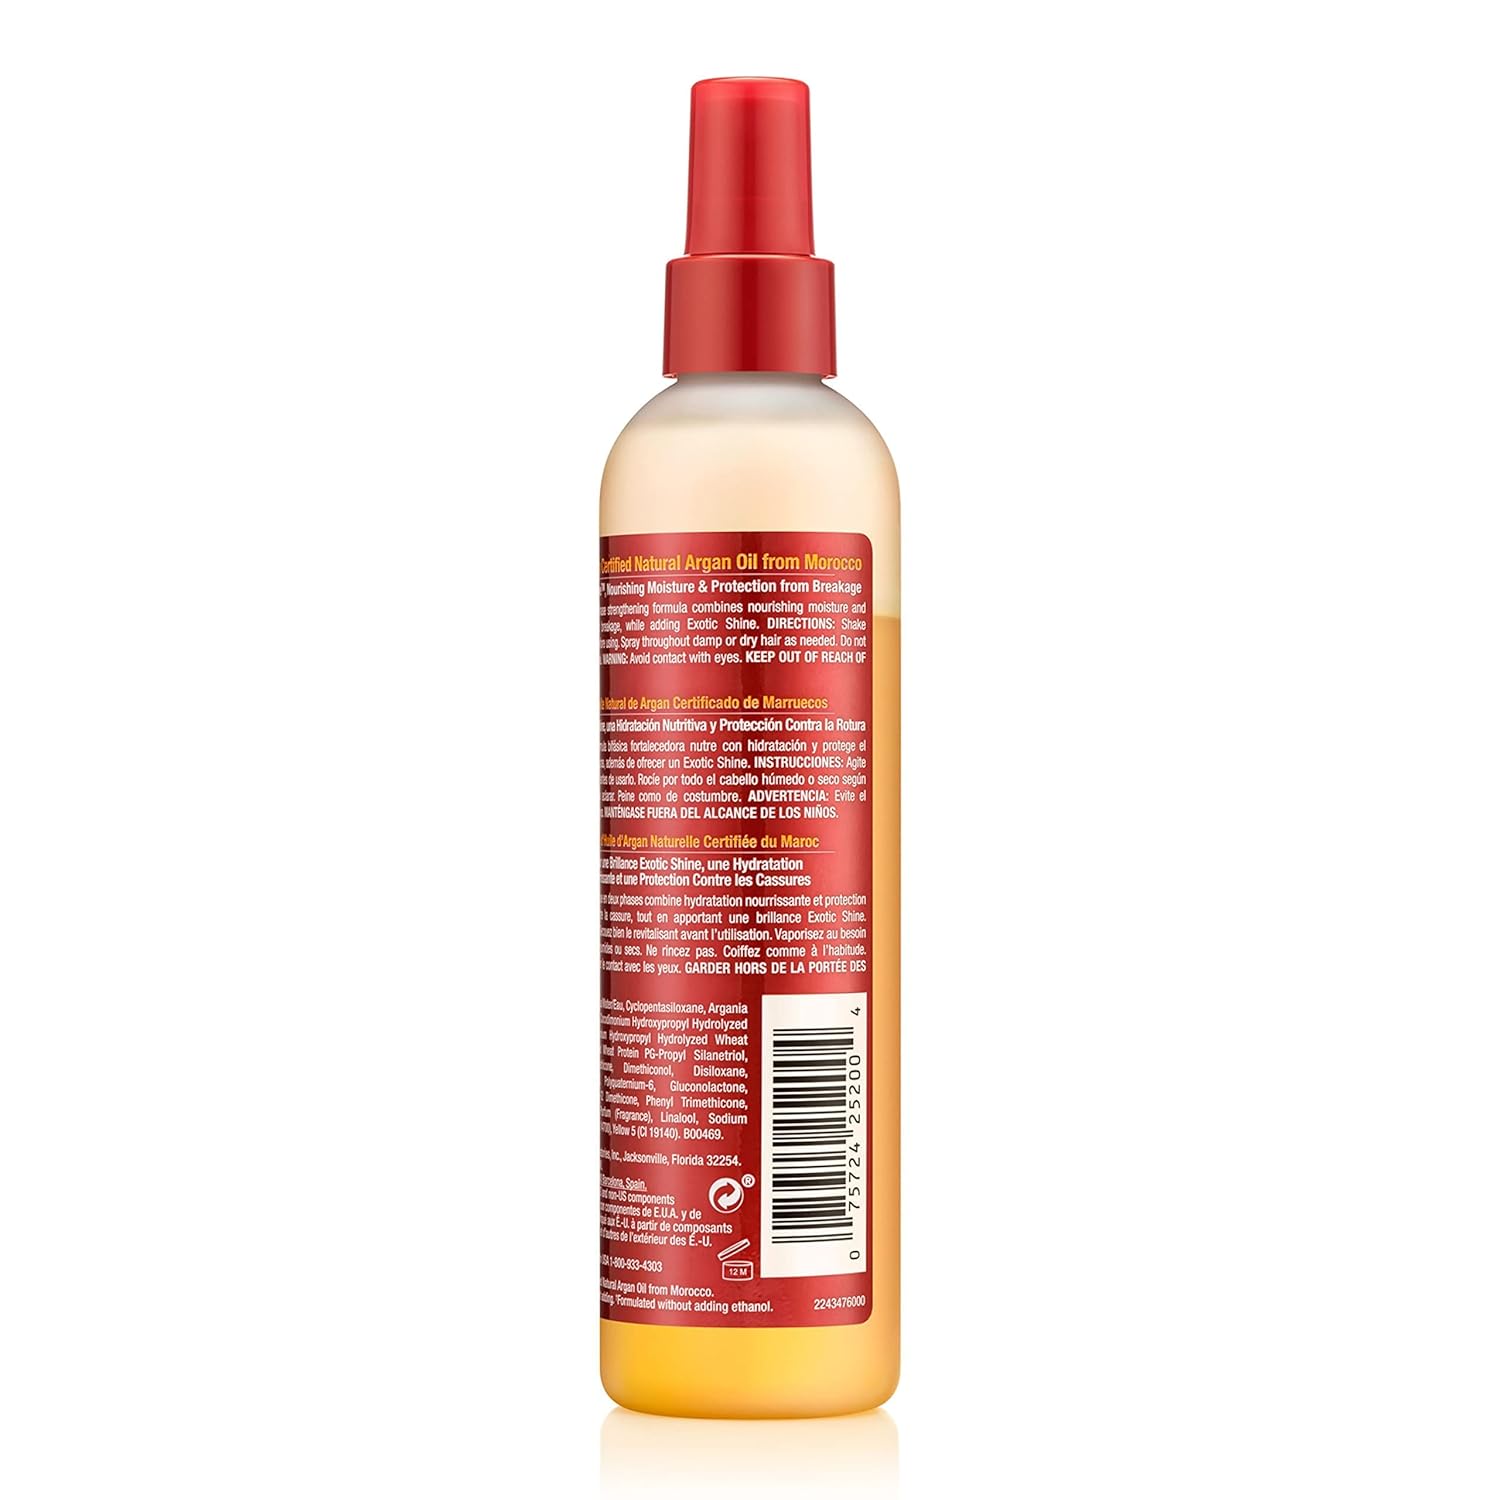 Creme of Nature Strength & Shine Leave-In Conditioner with Argan Oil, 8.4 fl oz (RR25200)